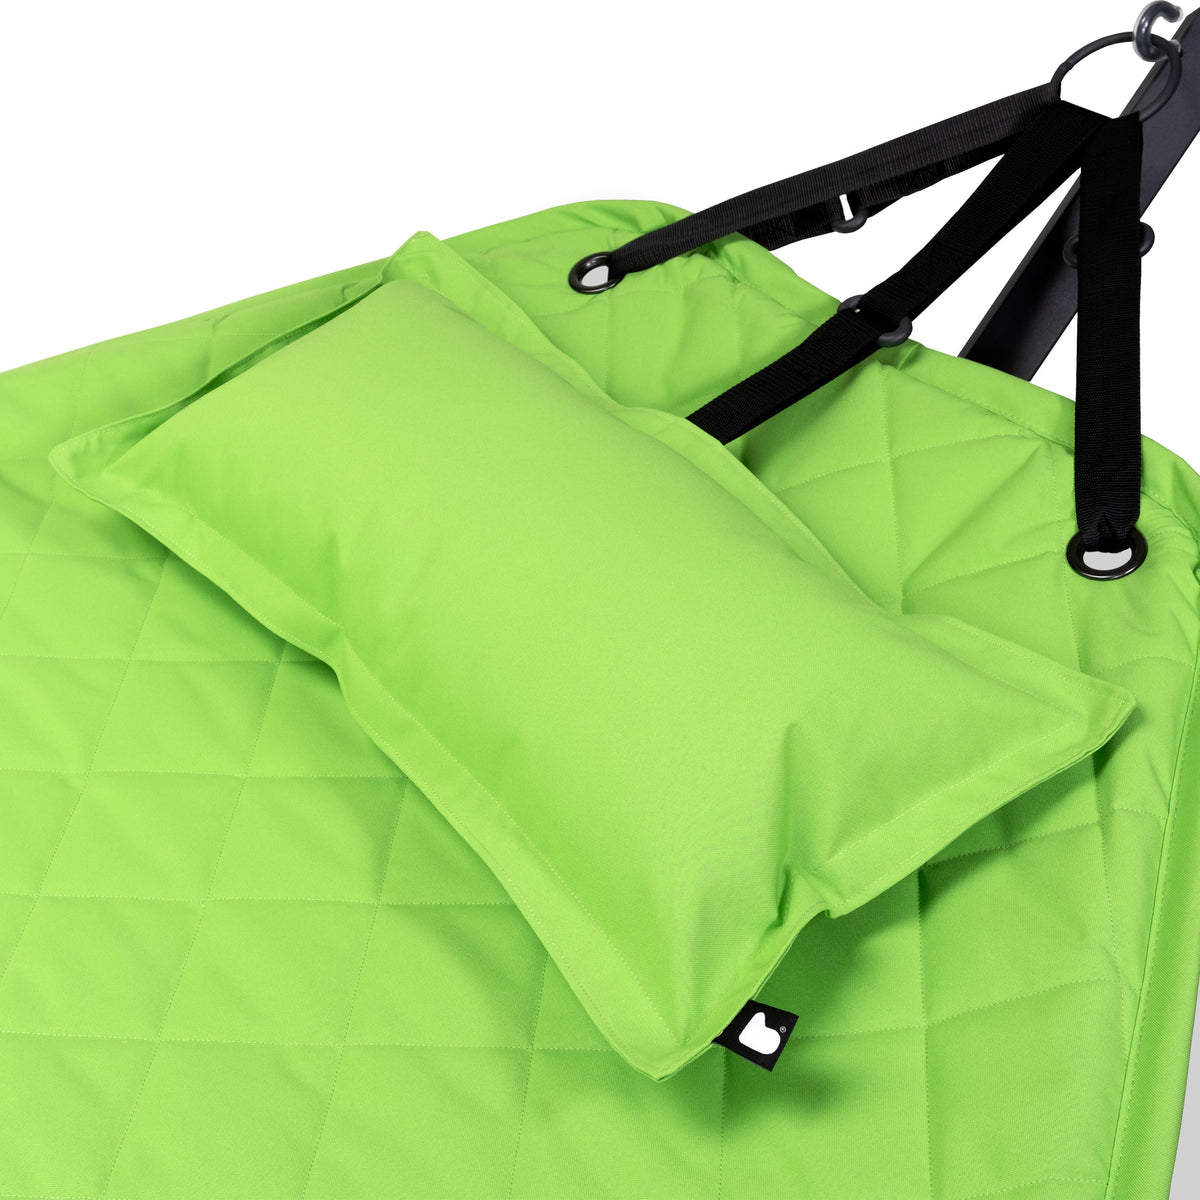 Extreme Lounging Lime B Hammock with Cushion